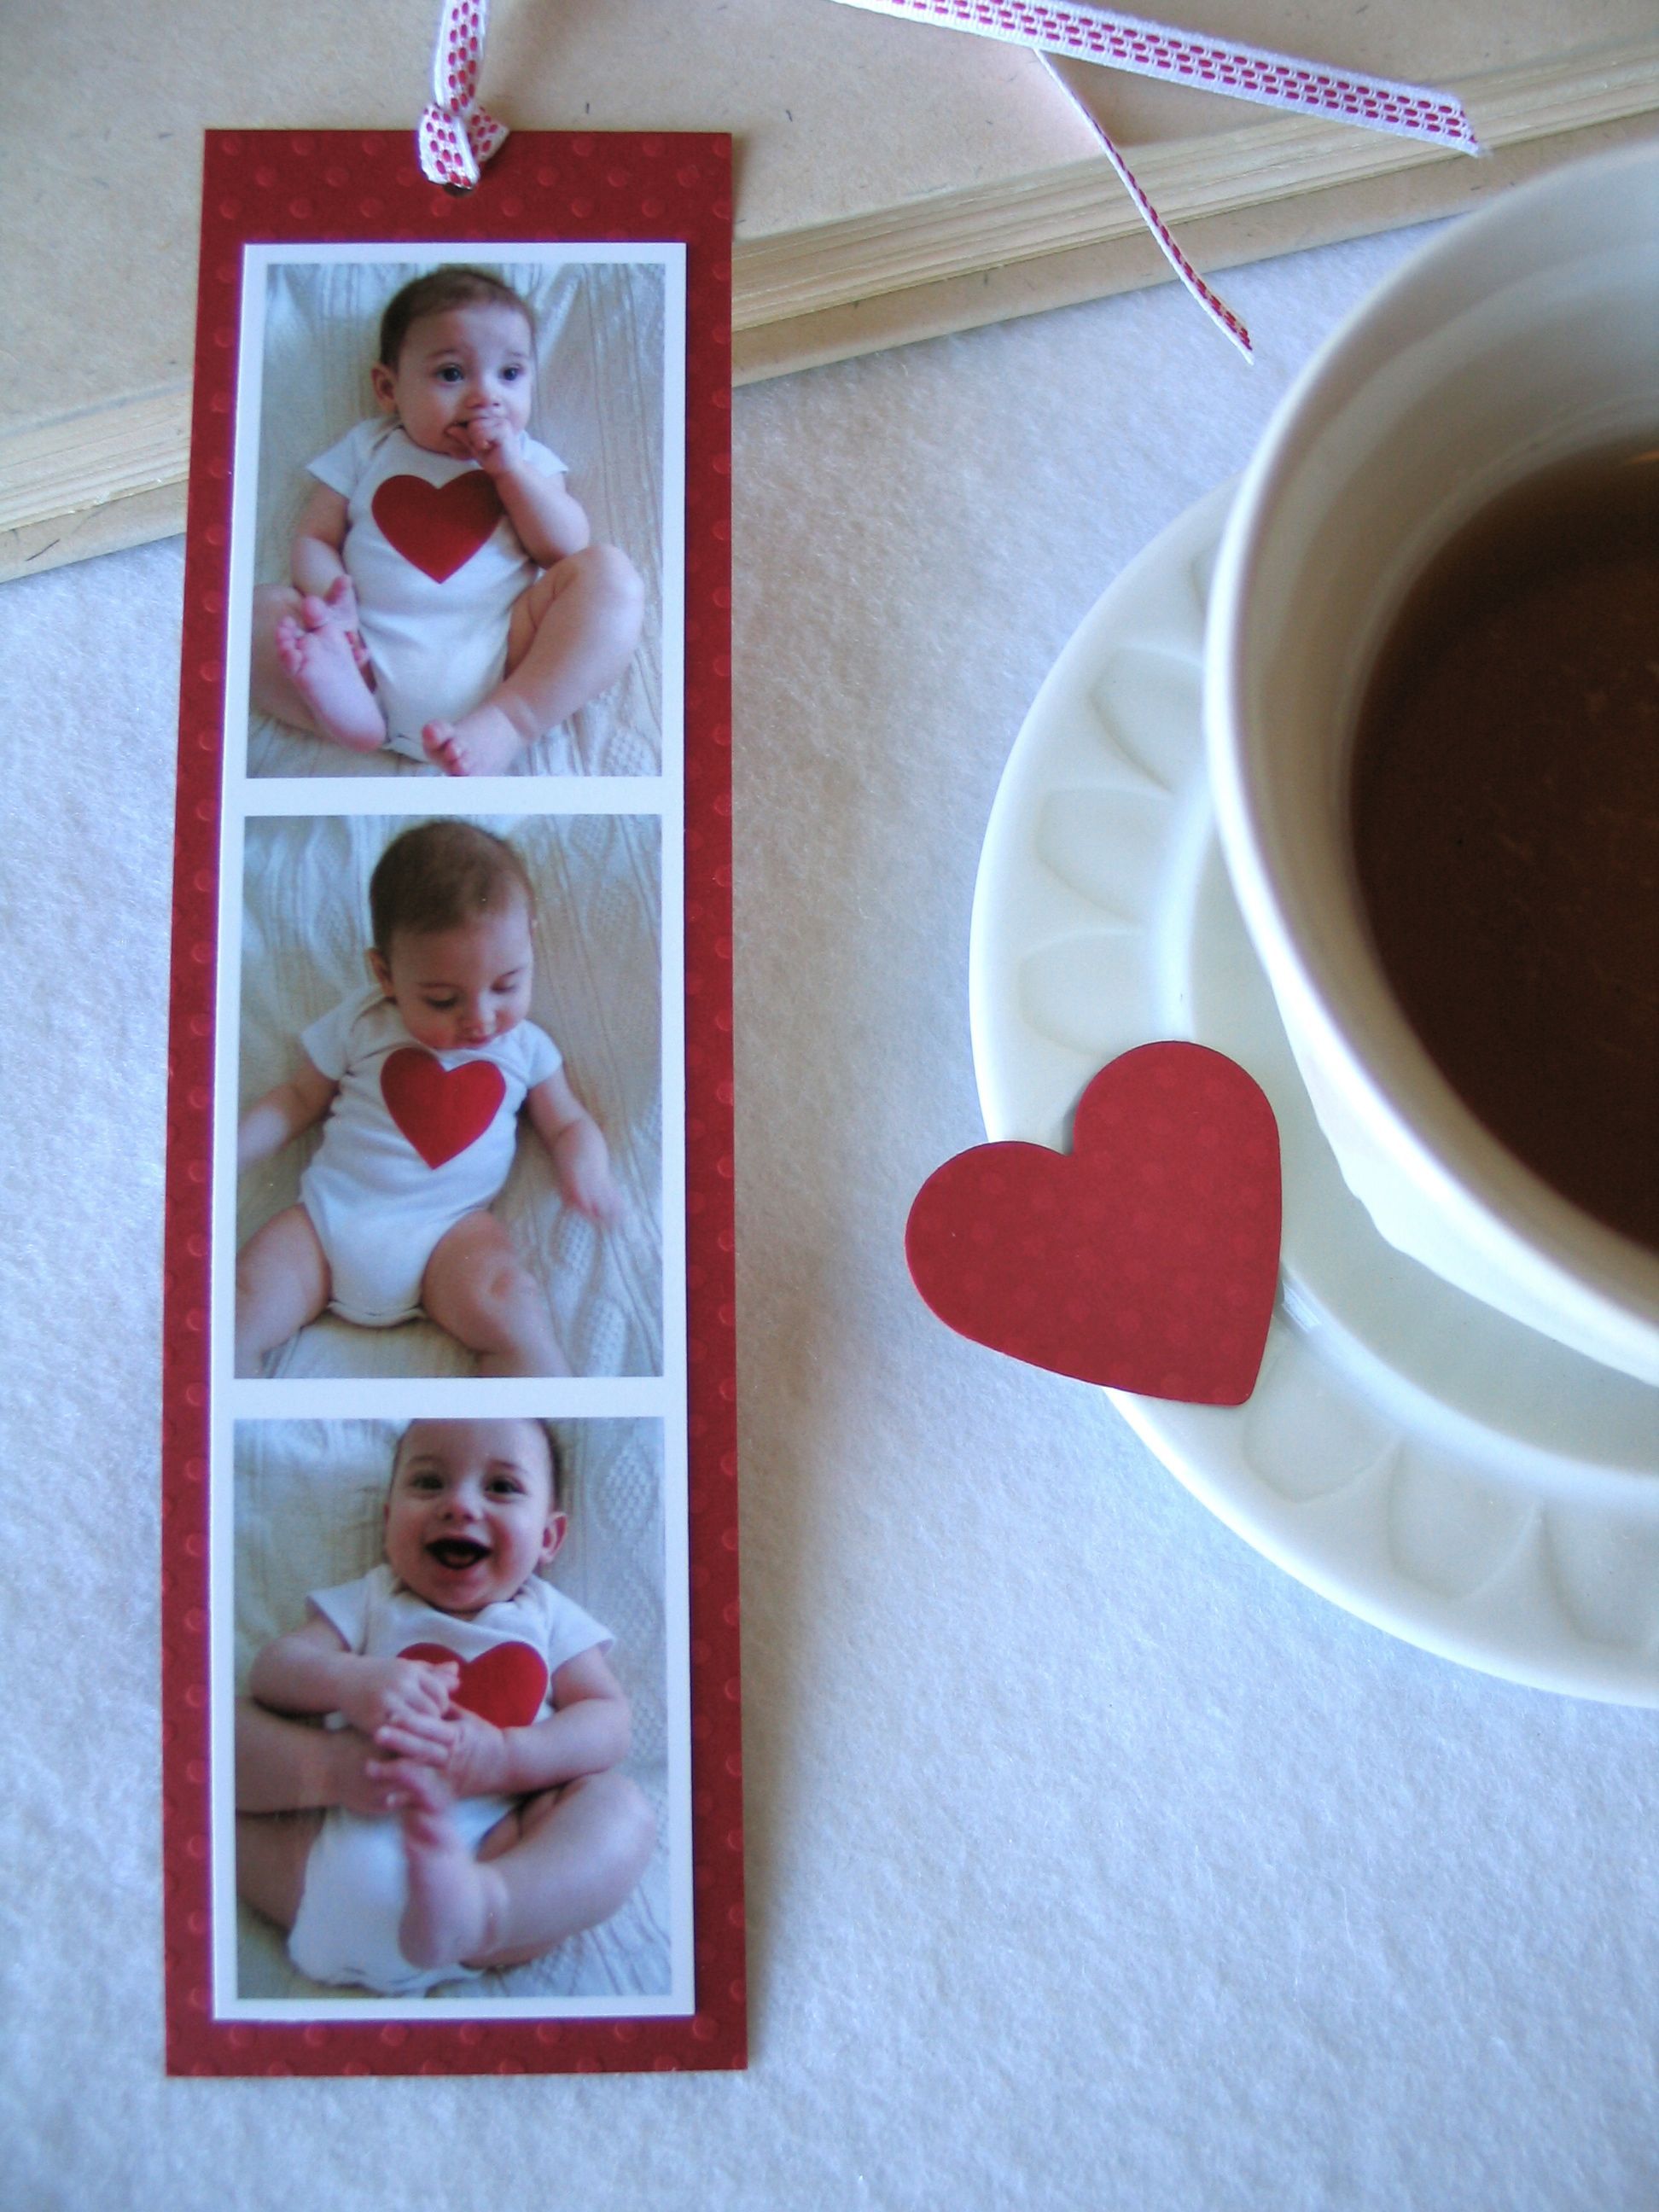 bookmark=oooh good idea for family valentines to grandparents hehe